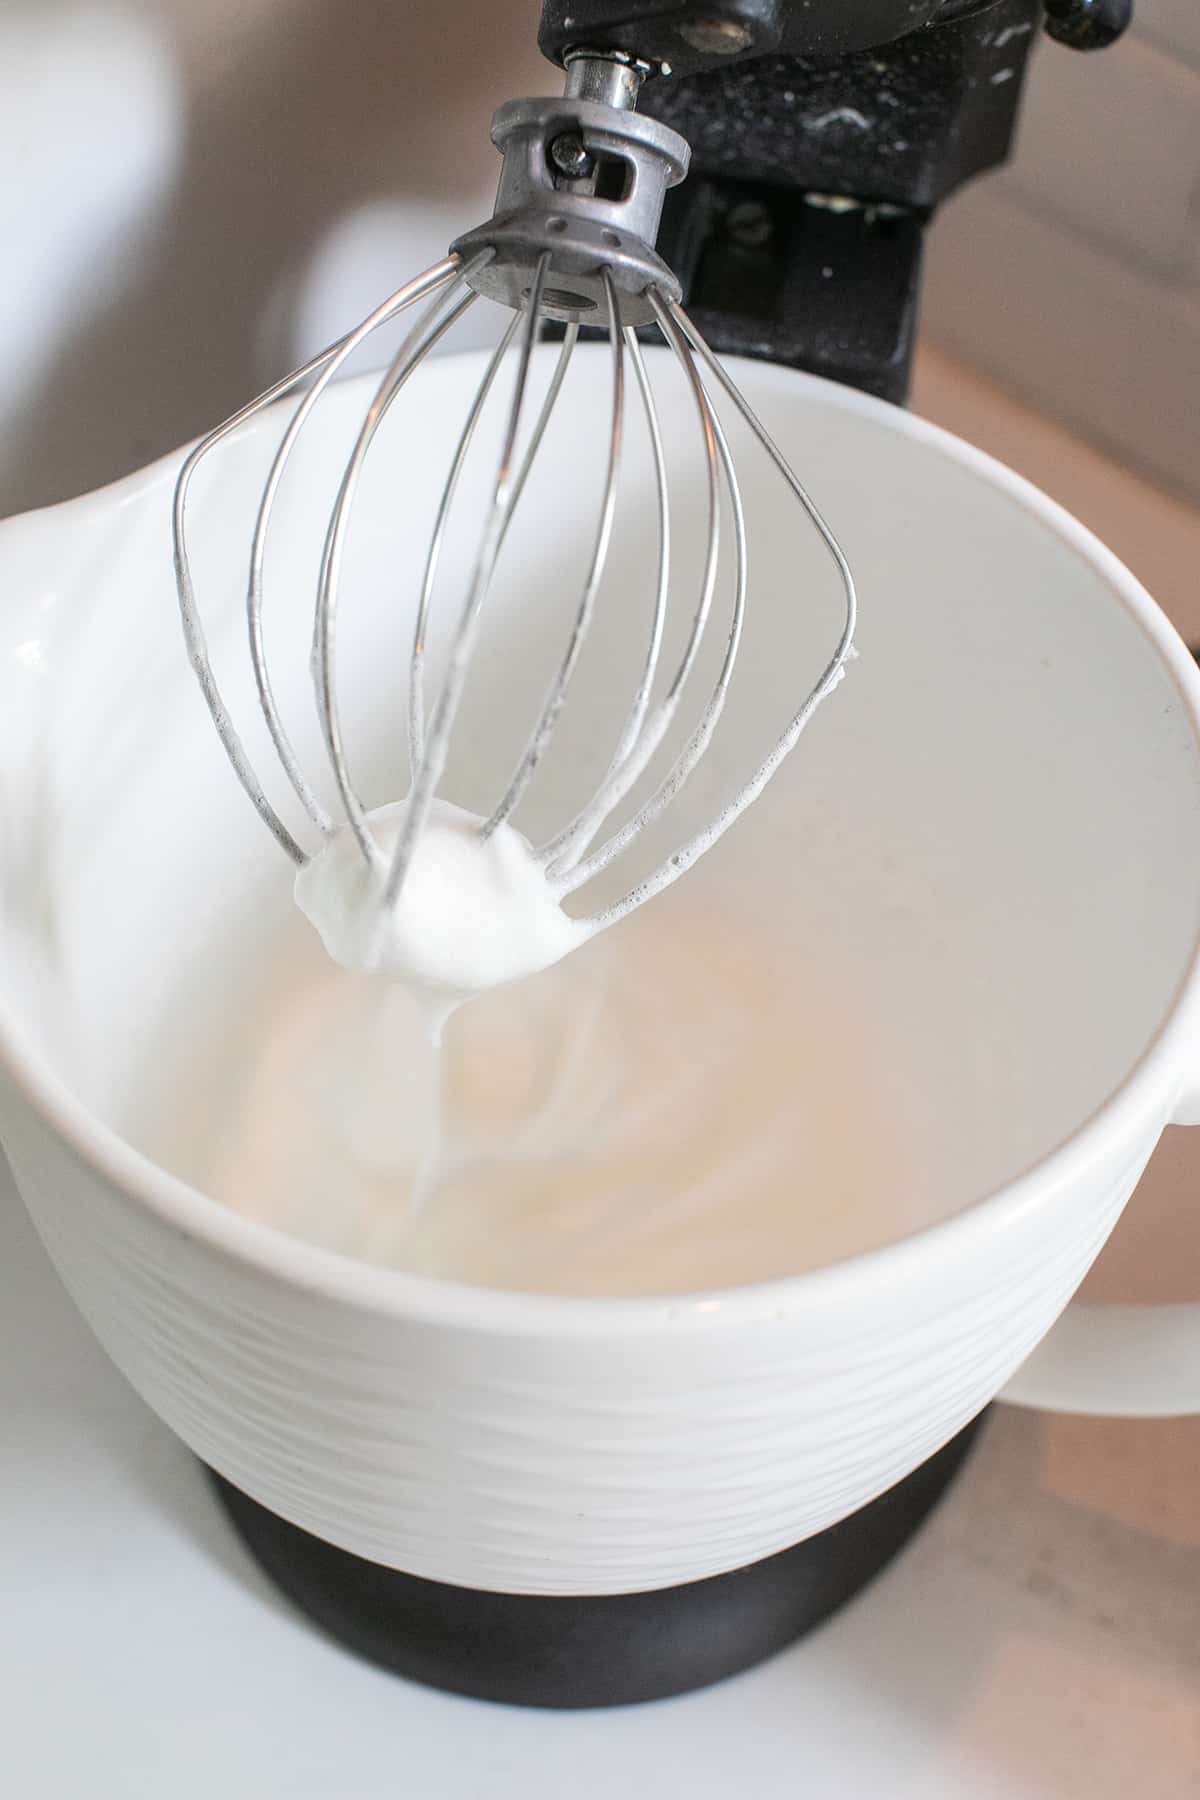 Egg whites being whipped in an electric mixer with the whisk attachment.